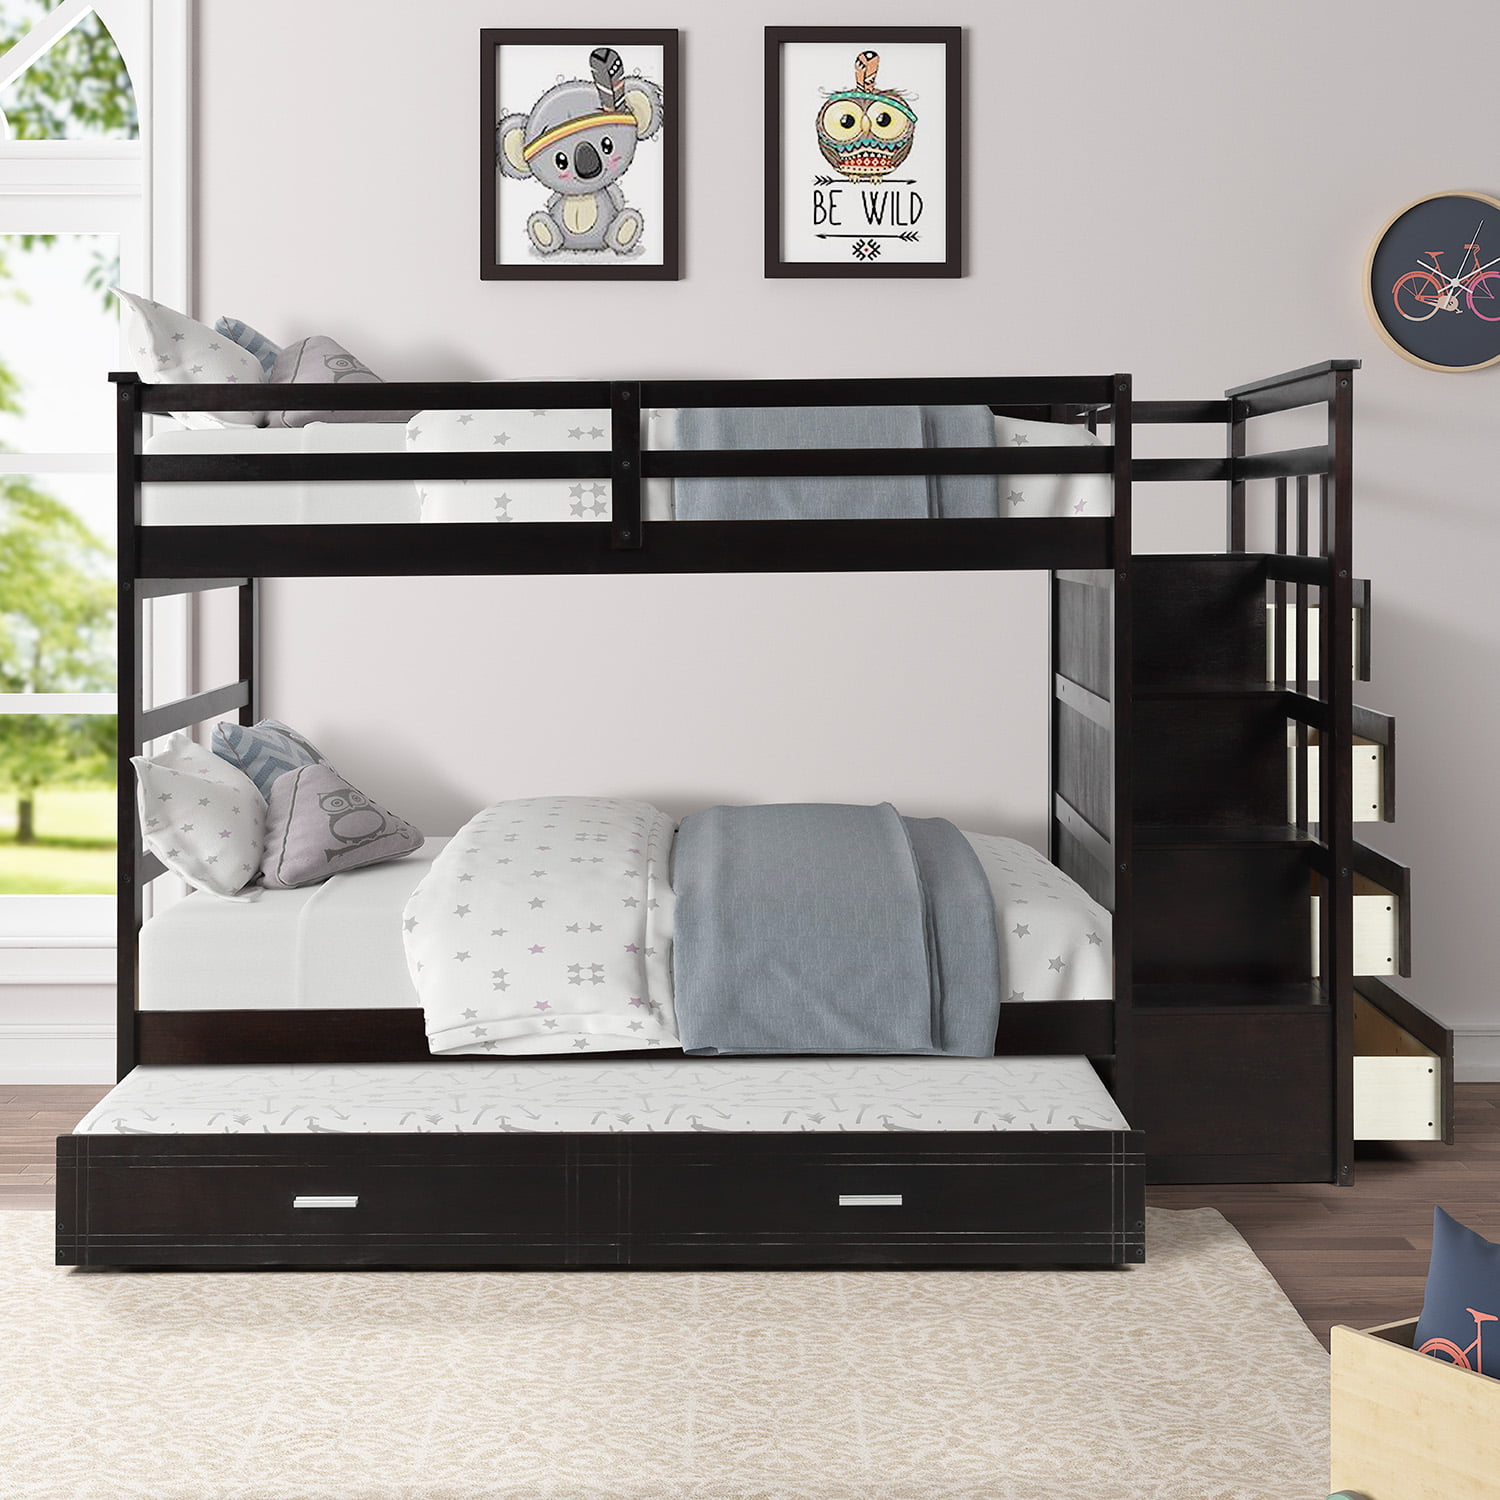 Wood Twin Over Bunk Beds For 3 12, Old Wood Bunk Beds